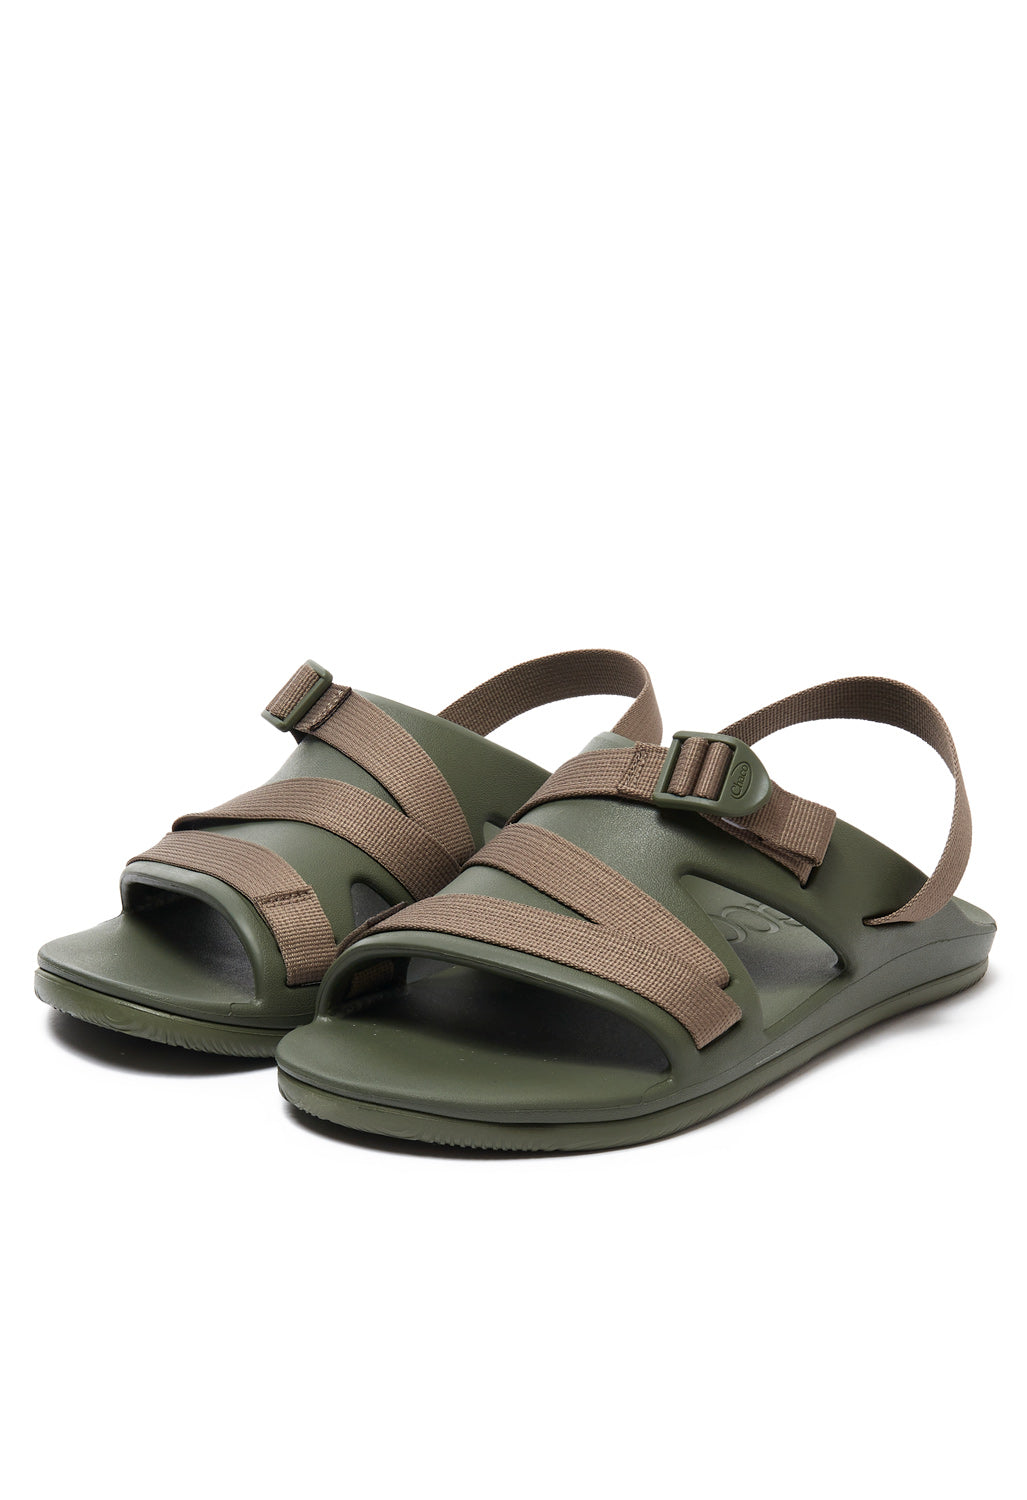 Chaco Chillos Men's Sport Sandals - Moss